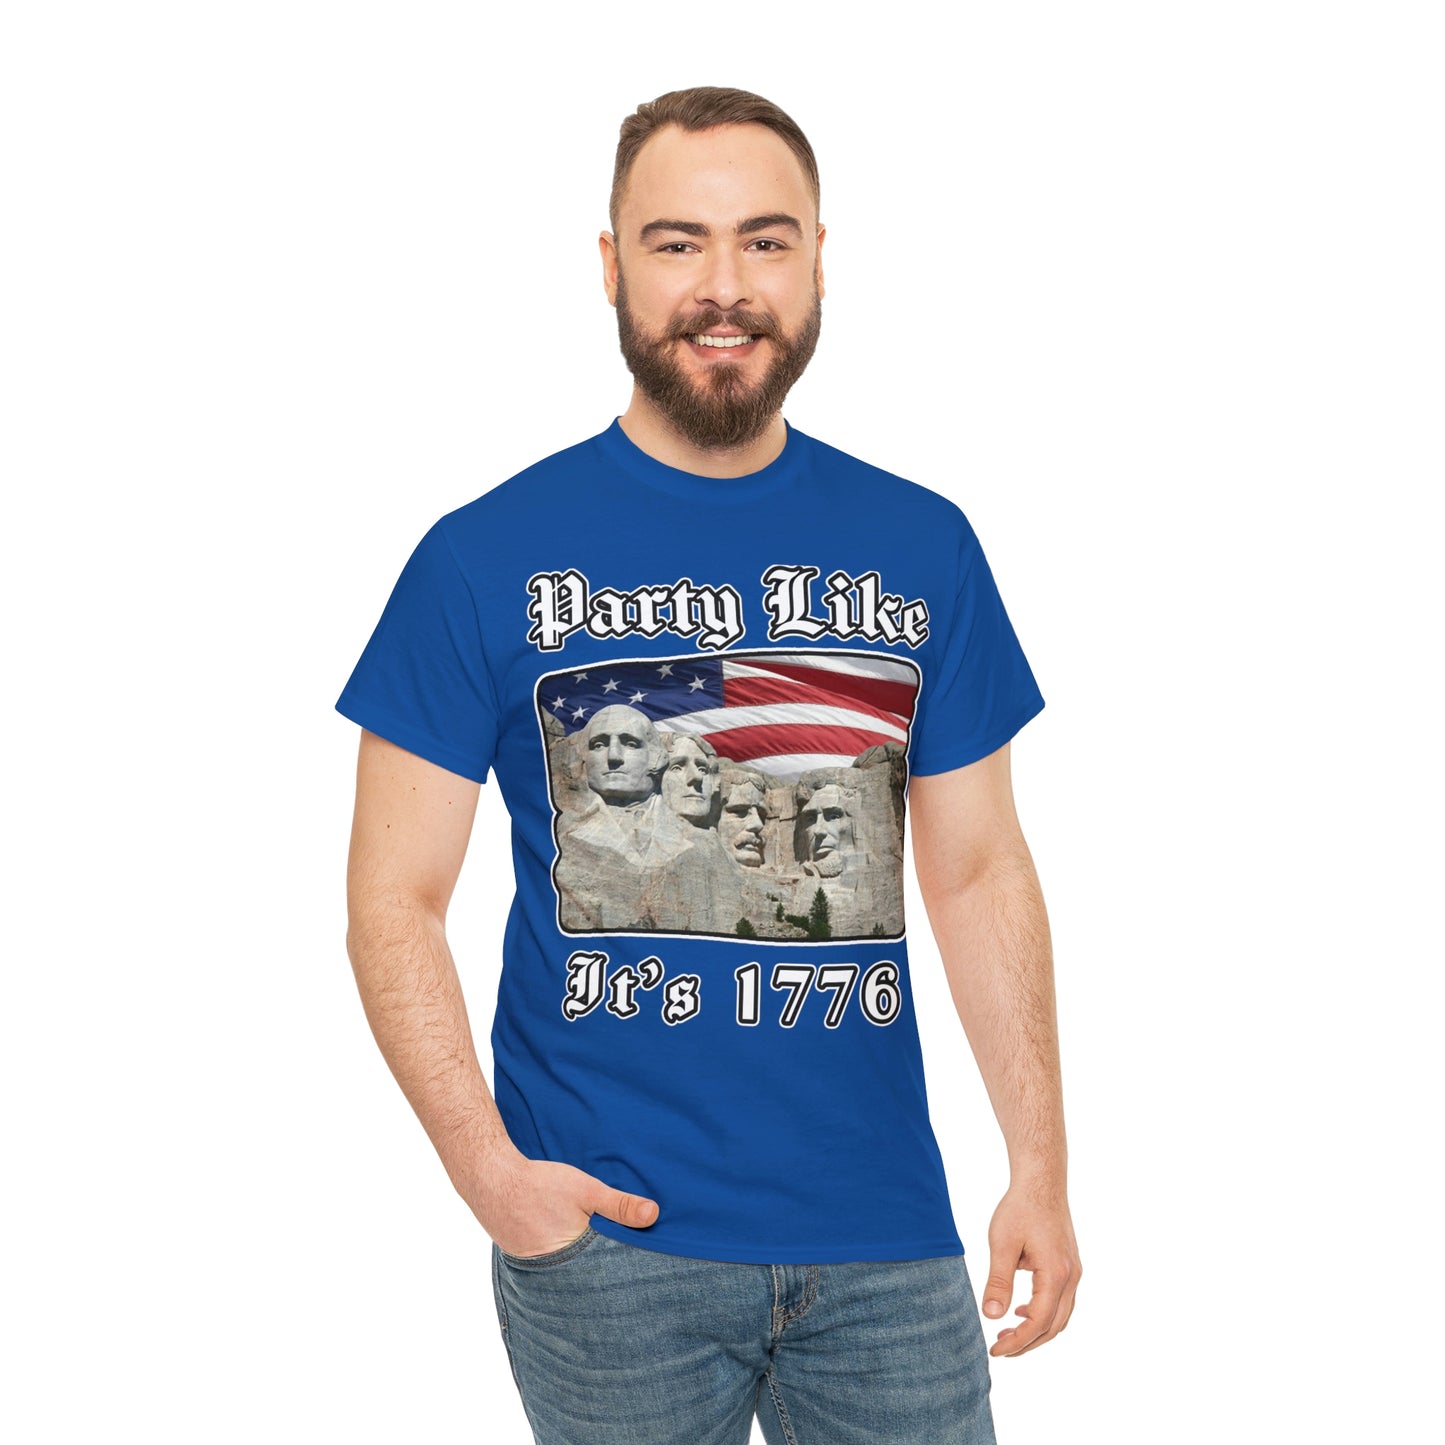 Party like it's 1776 Shirt